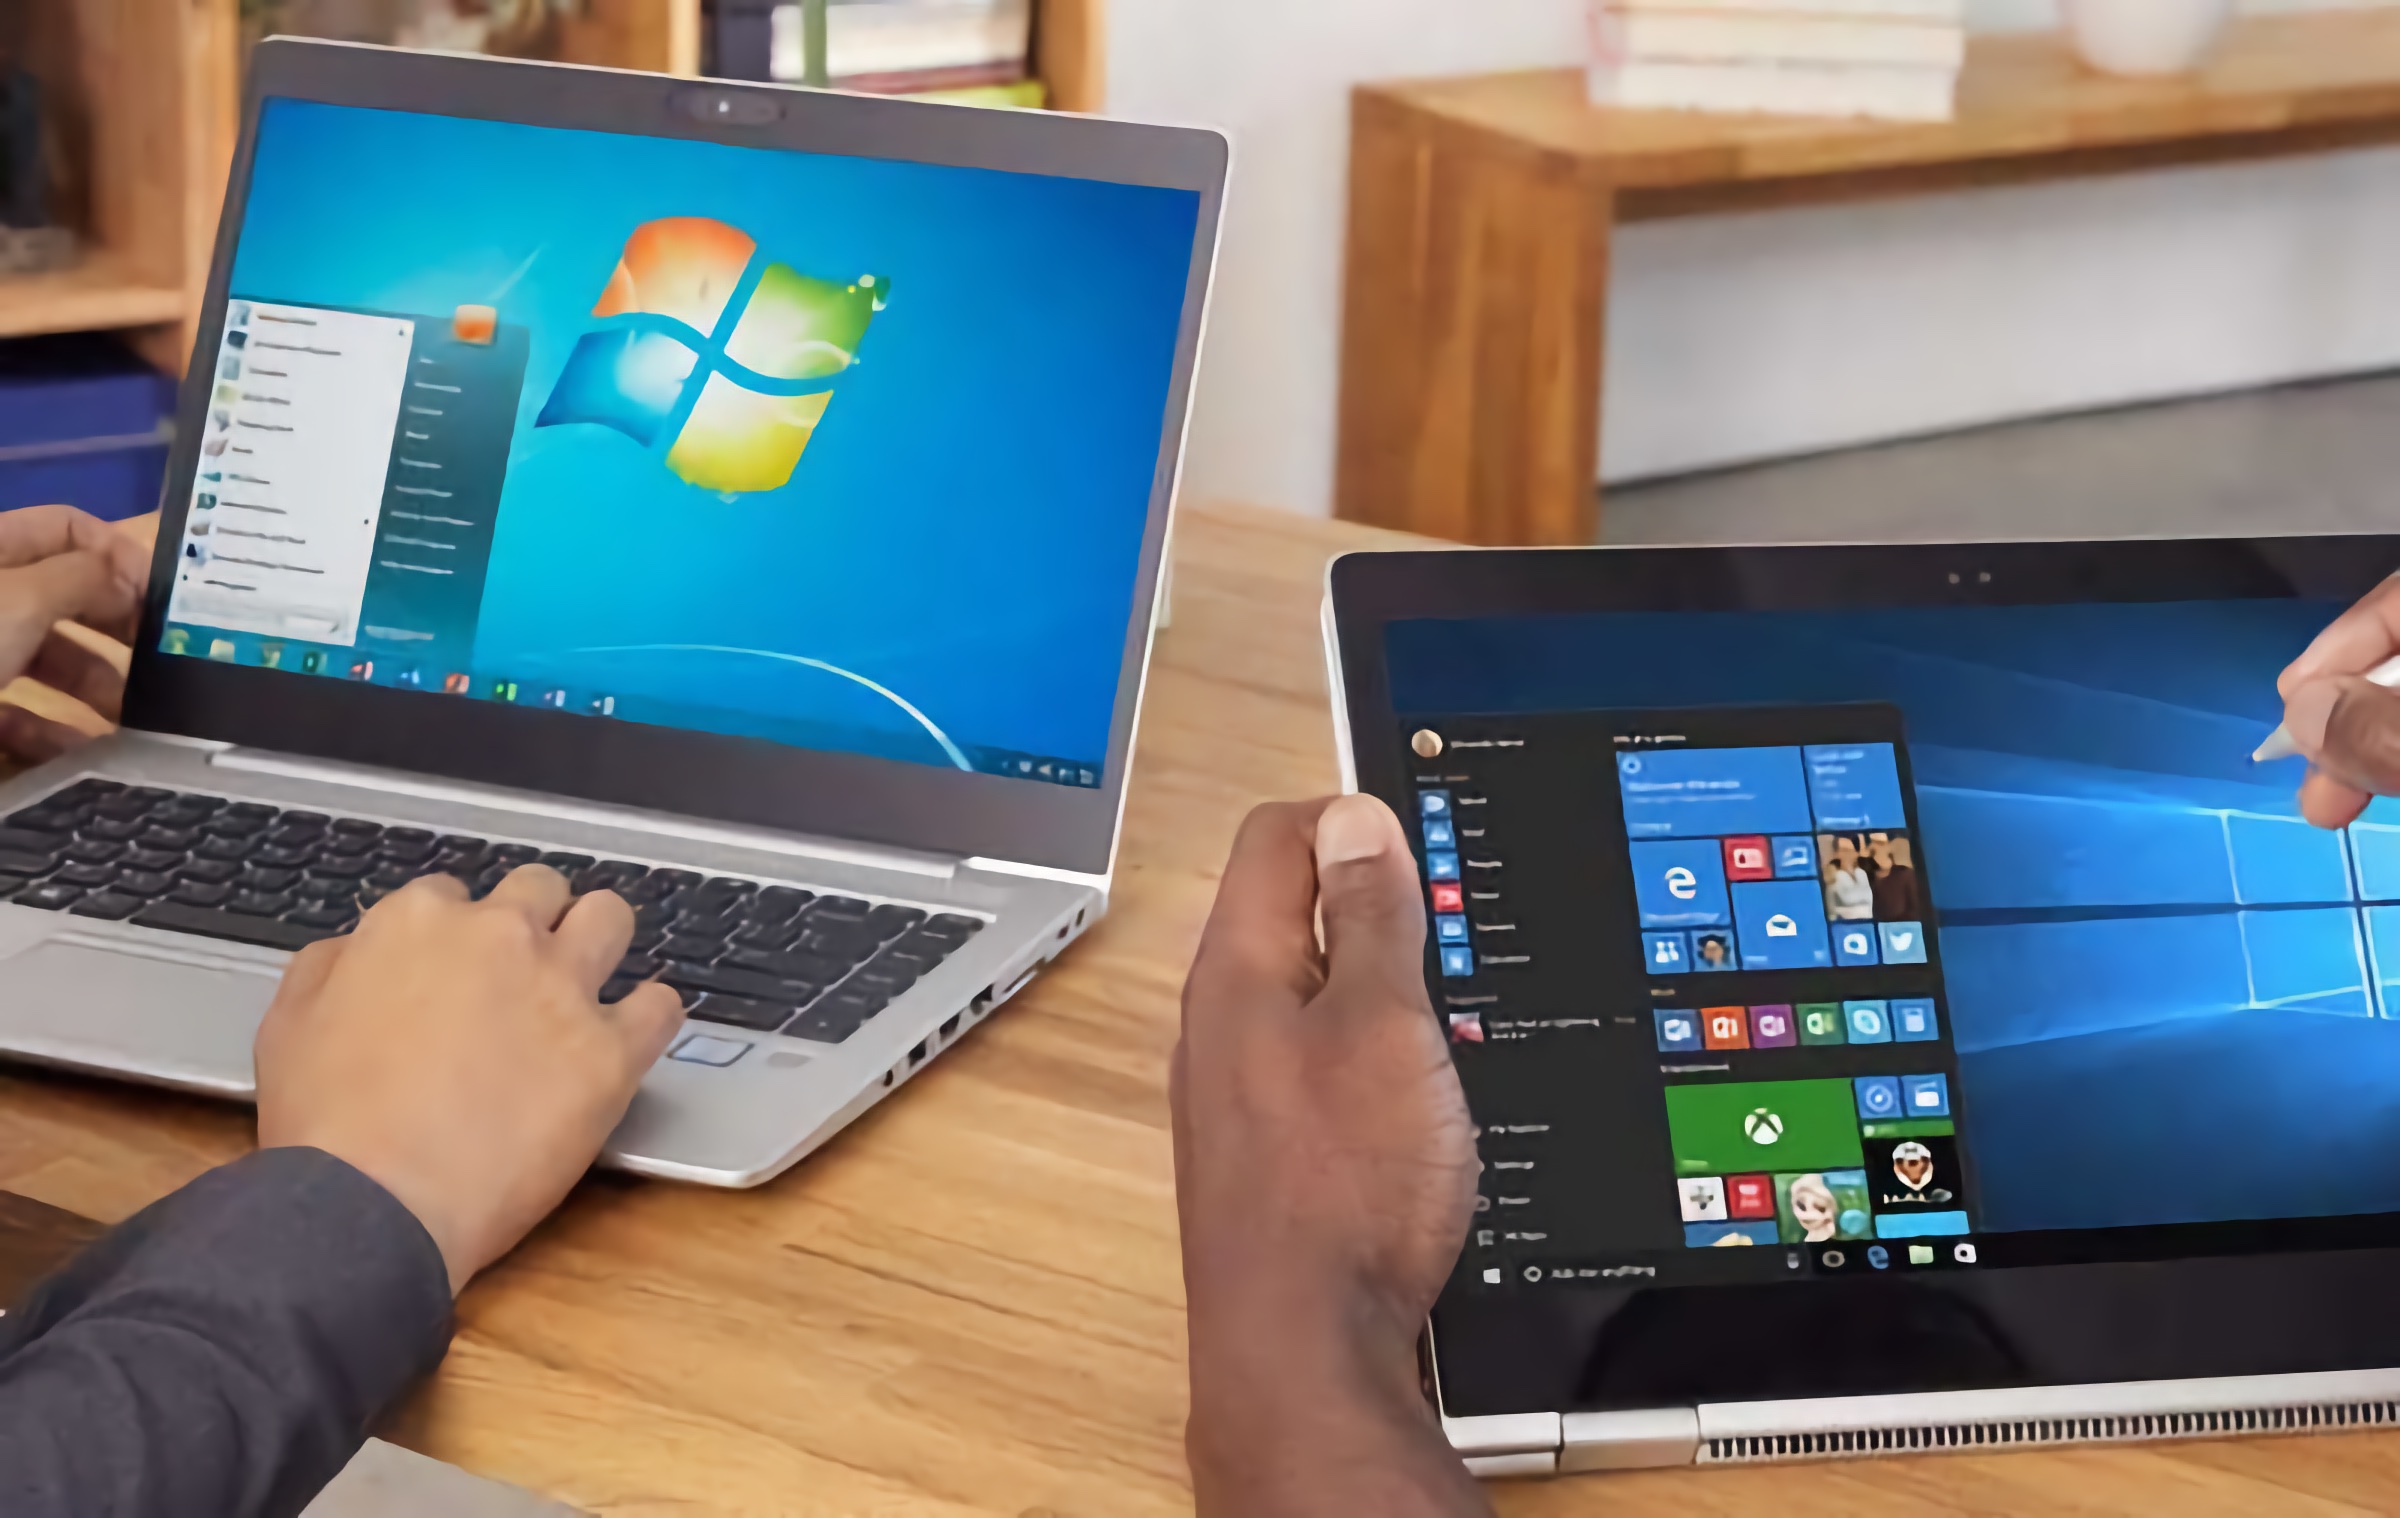 Microsoft has updated Windows 11, Windows 10, Windows 8.1 and Windows 7 – including fixing over fifty vulnerabilities